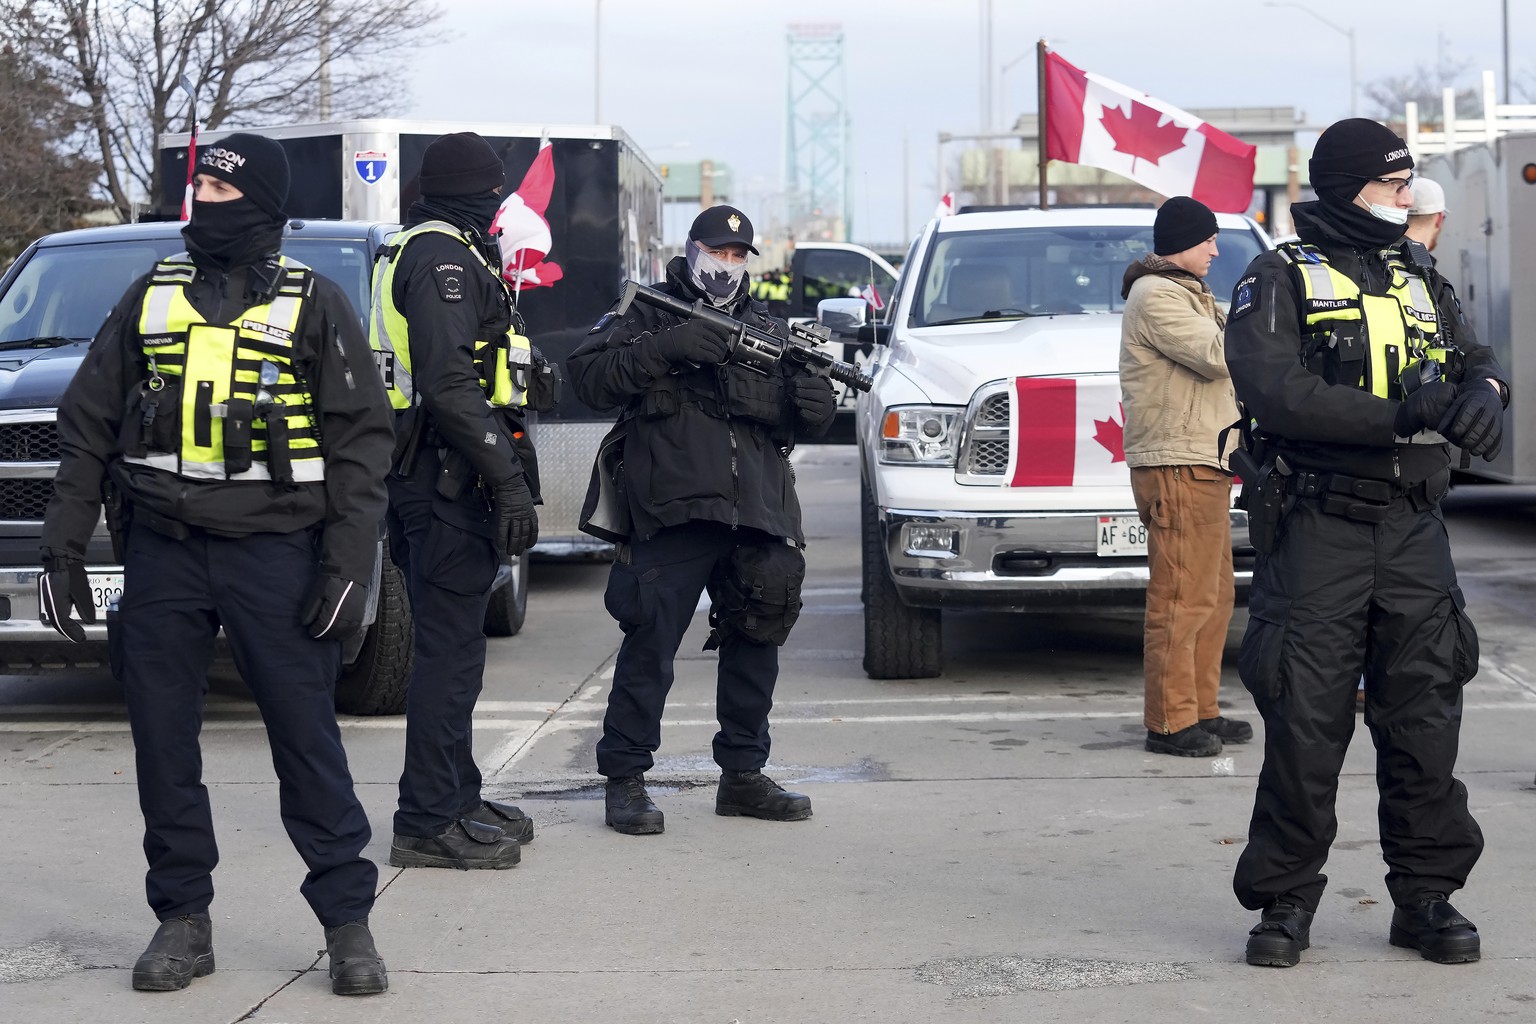 A police officer carries an ARWEN riot gun as officers prepare to enforce an injunction against a demonstration which has blocked traffic across the Ambassador Bridge by protesters against COVID-19 re ...